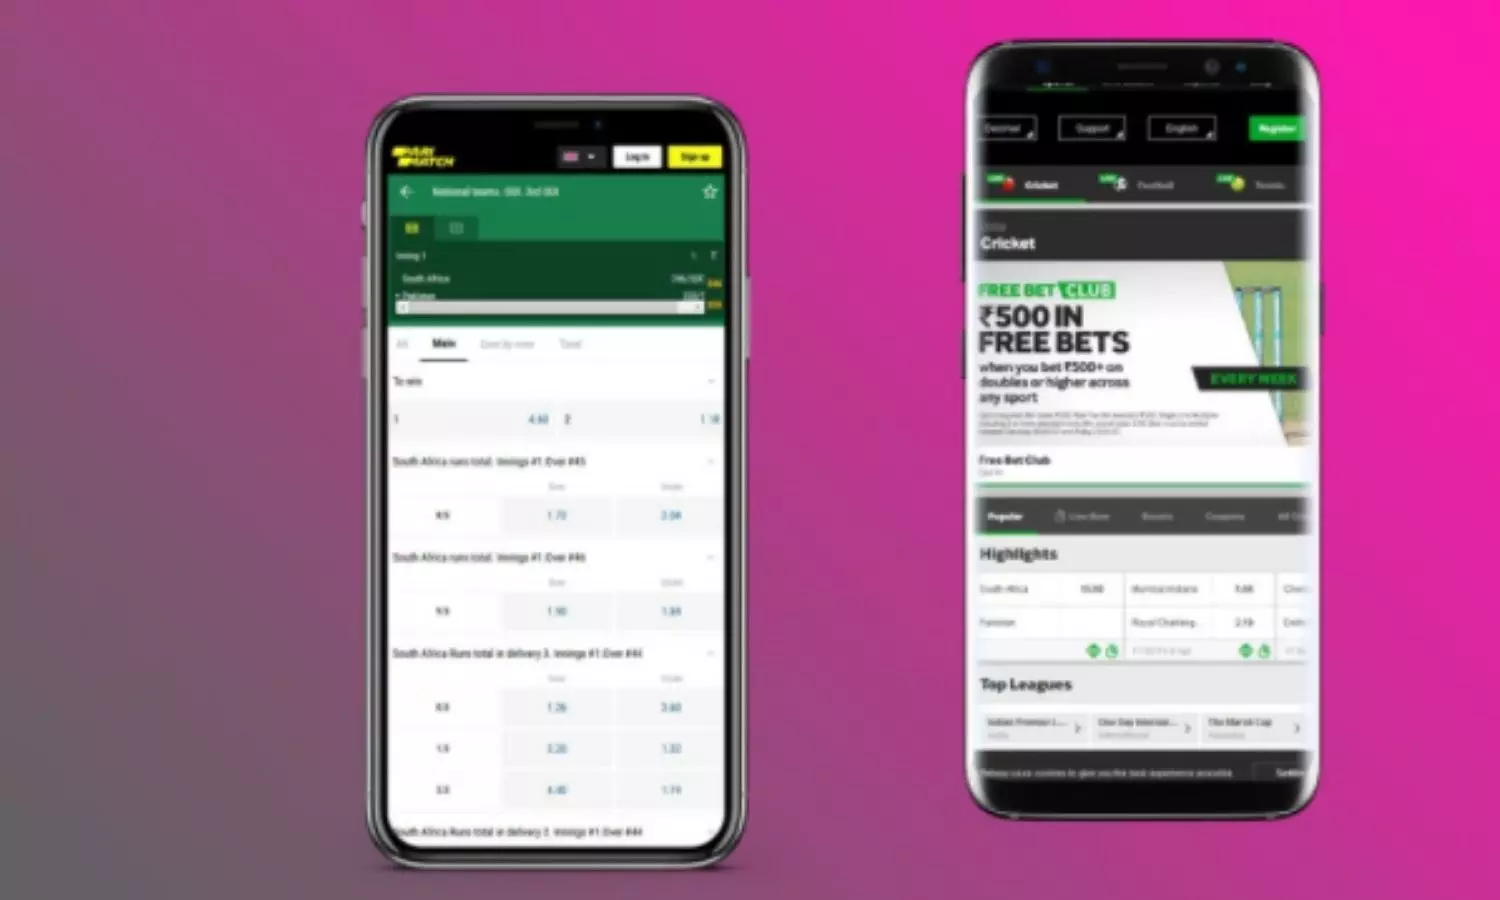 Why Live Betting Apps Is No Friend To Small Business